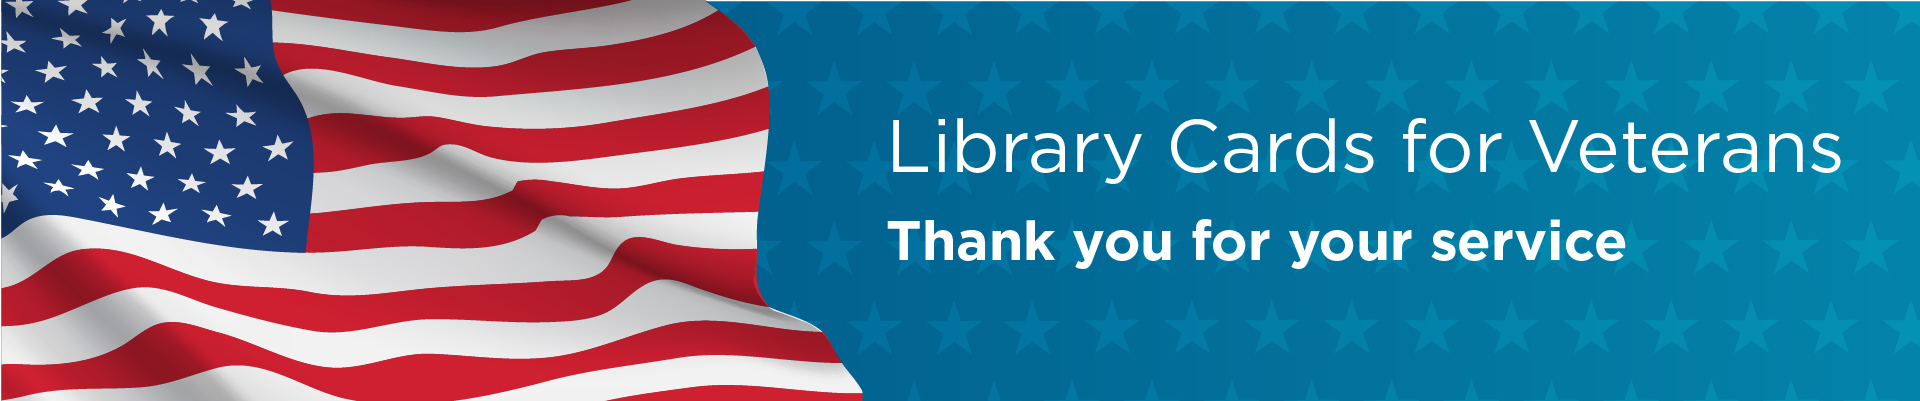 Library Cards for Veterans. Thank you for your service.